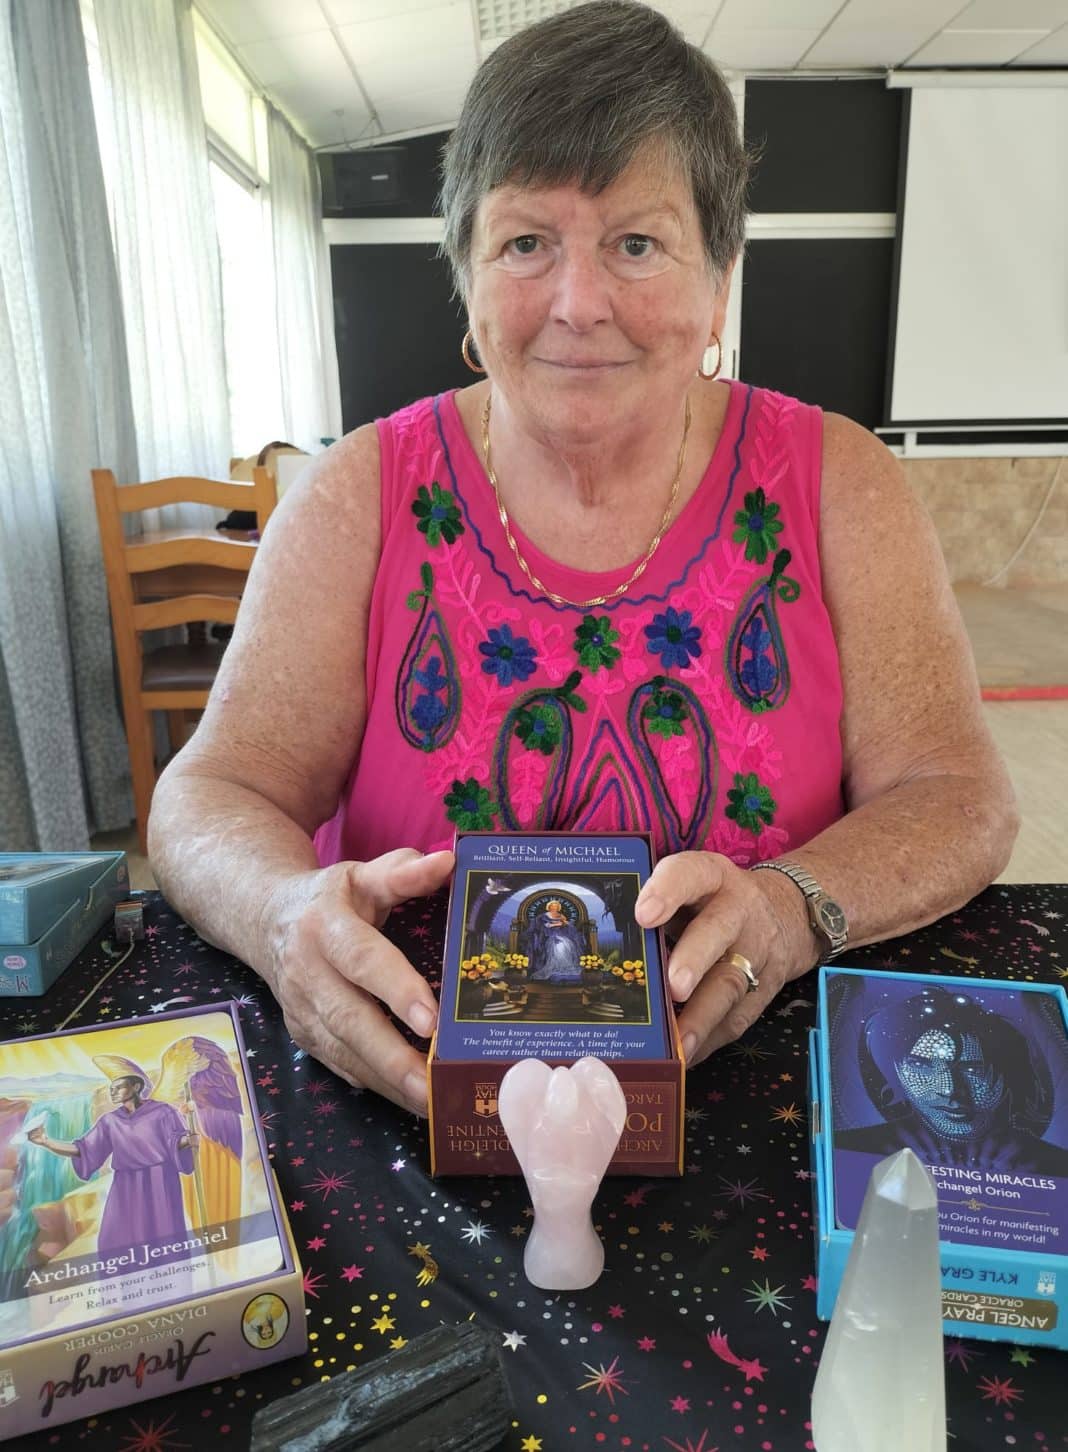 Local resident, freelance writer and clairvoyant Sandra Piddock